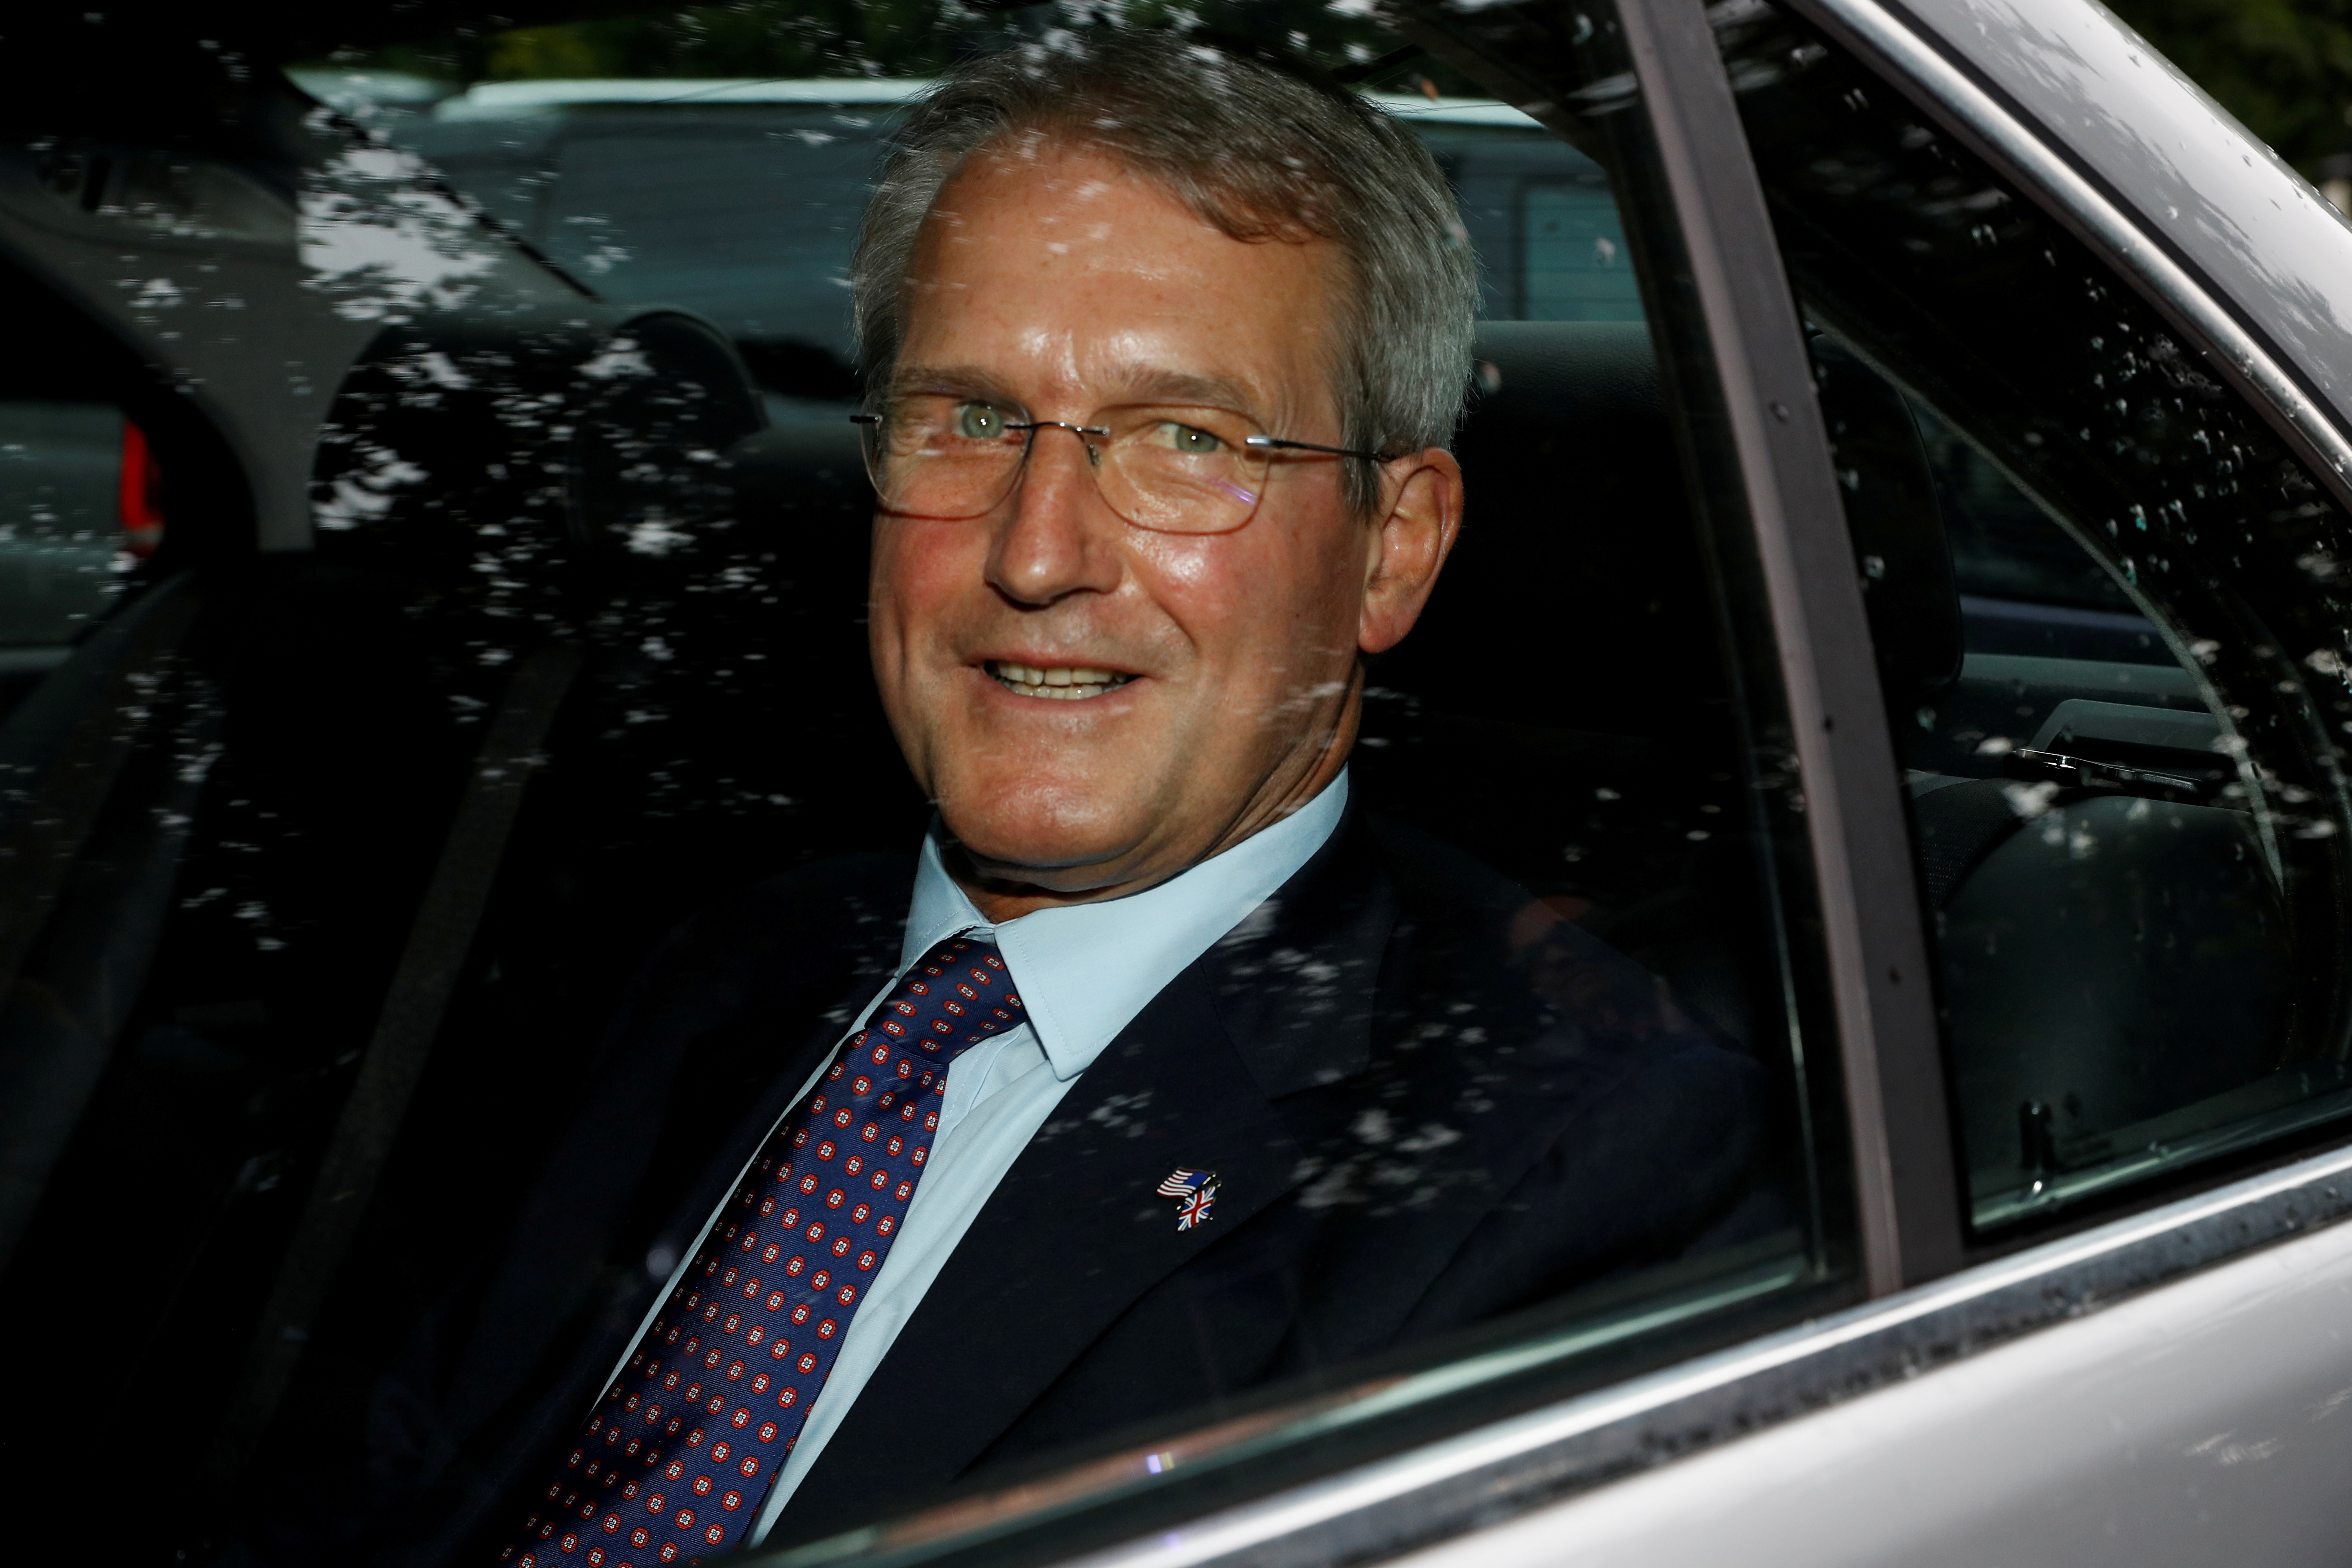 Owen Paterson leaves Winfield House during U.S. President Donald Trump's state visit in London, Britain, June 4, 2019. REUTERS/Peter Nicholls/File Photo